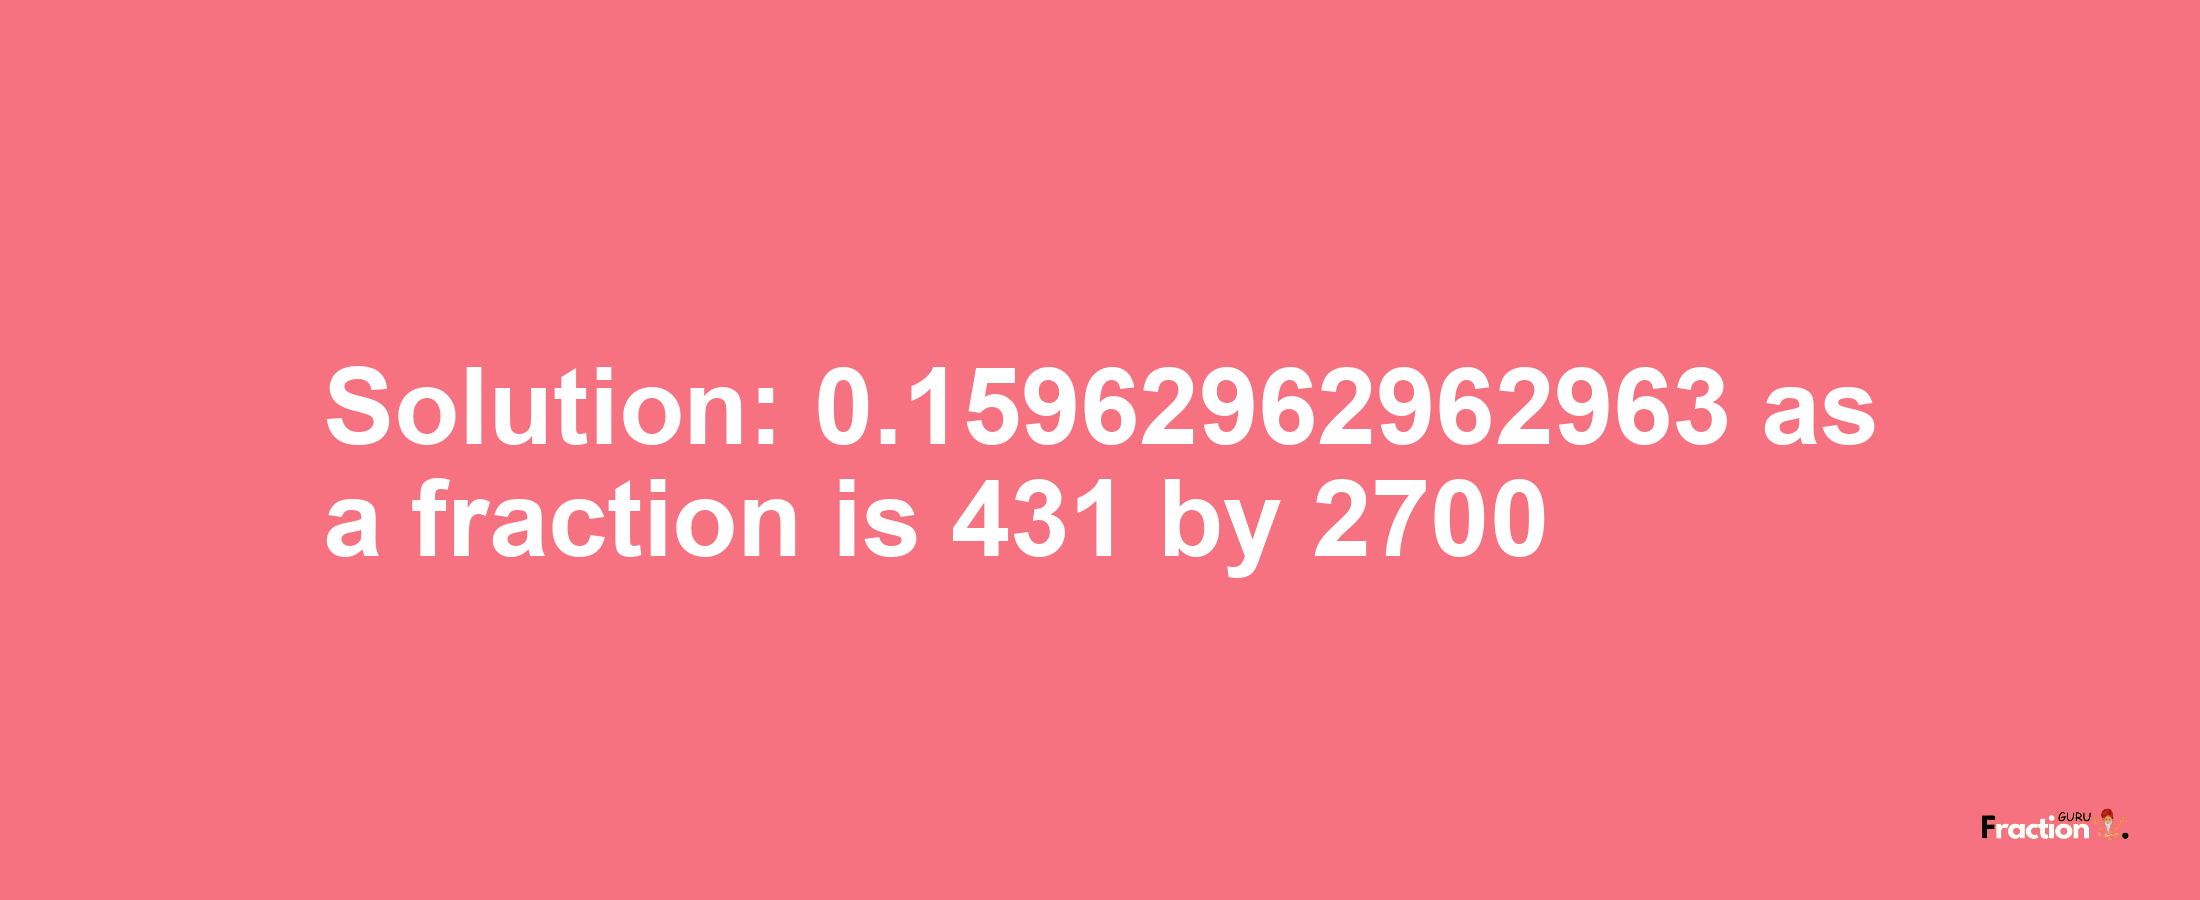 Solution:0.15962962962963 as a fraction is 431/2700